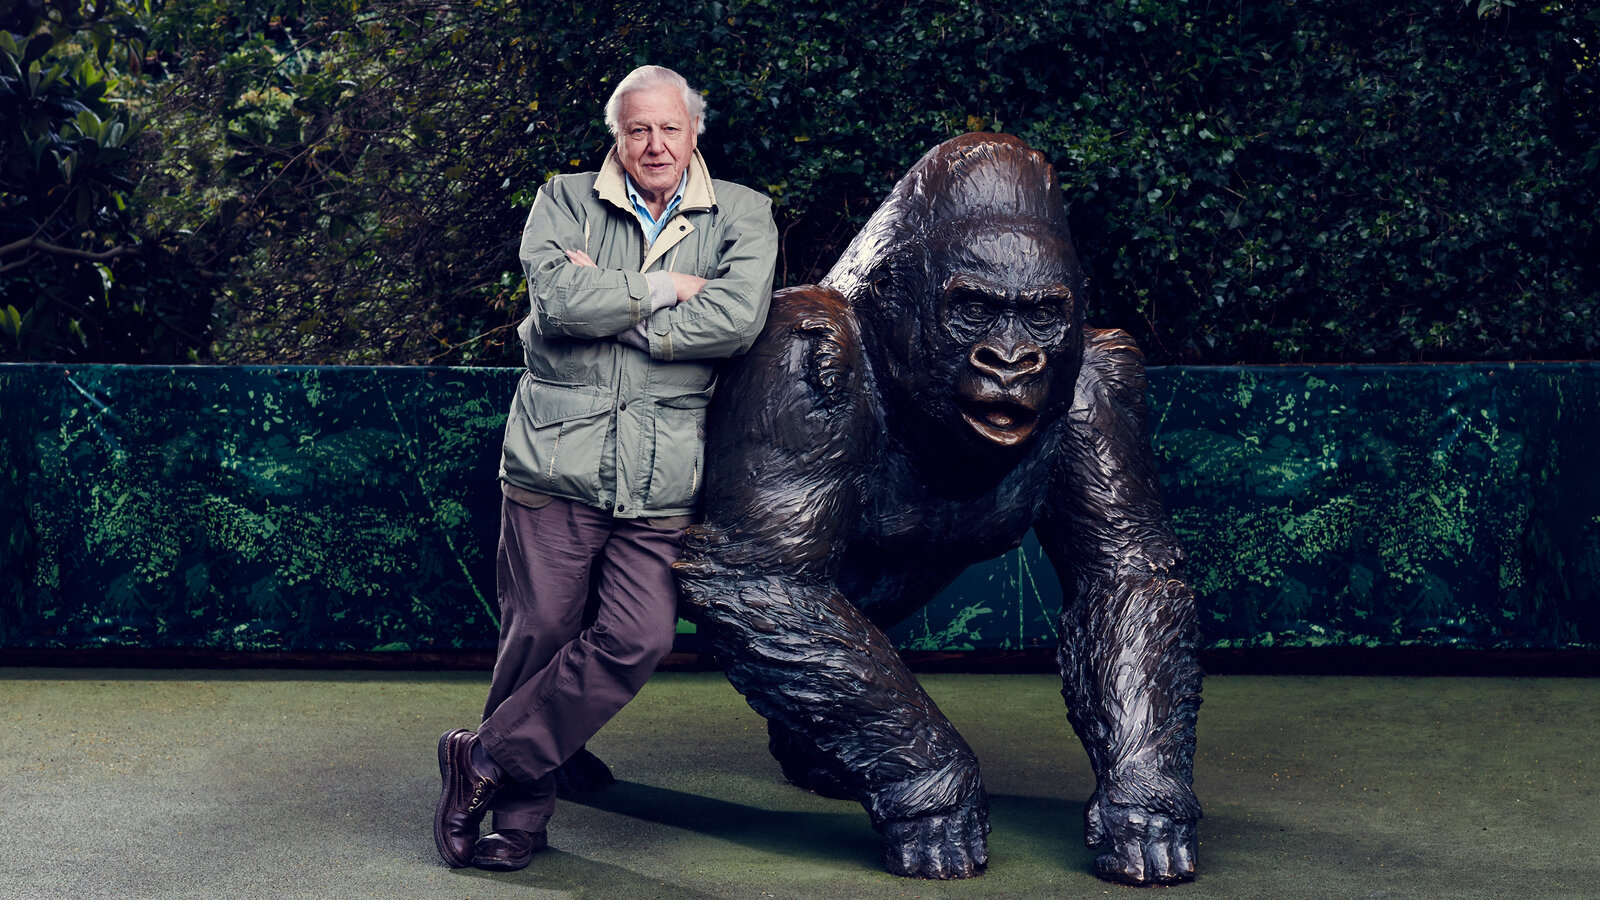 A very happy birthday to Sir David Attenborough from all at SAVE Bristol Zoo Gardens. 

&quot;It seems to me that the natural world is the greatest source of excitement; the greatest source of visual beauty; the greatest source of intellectual intere